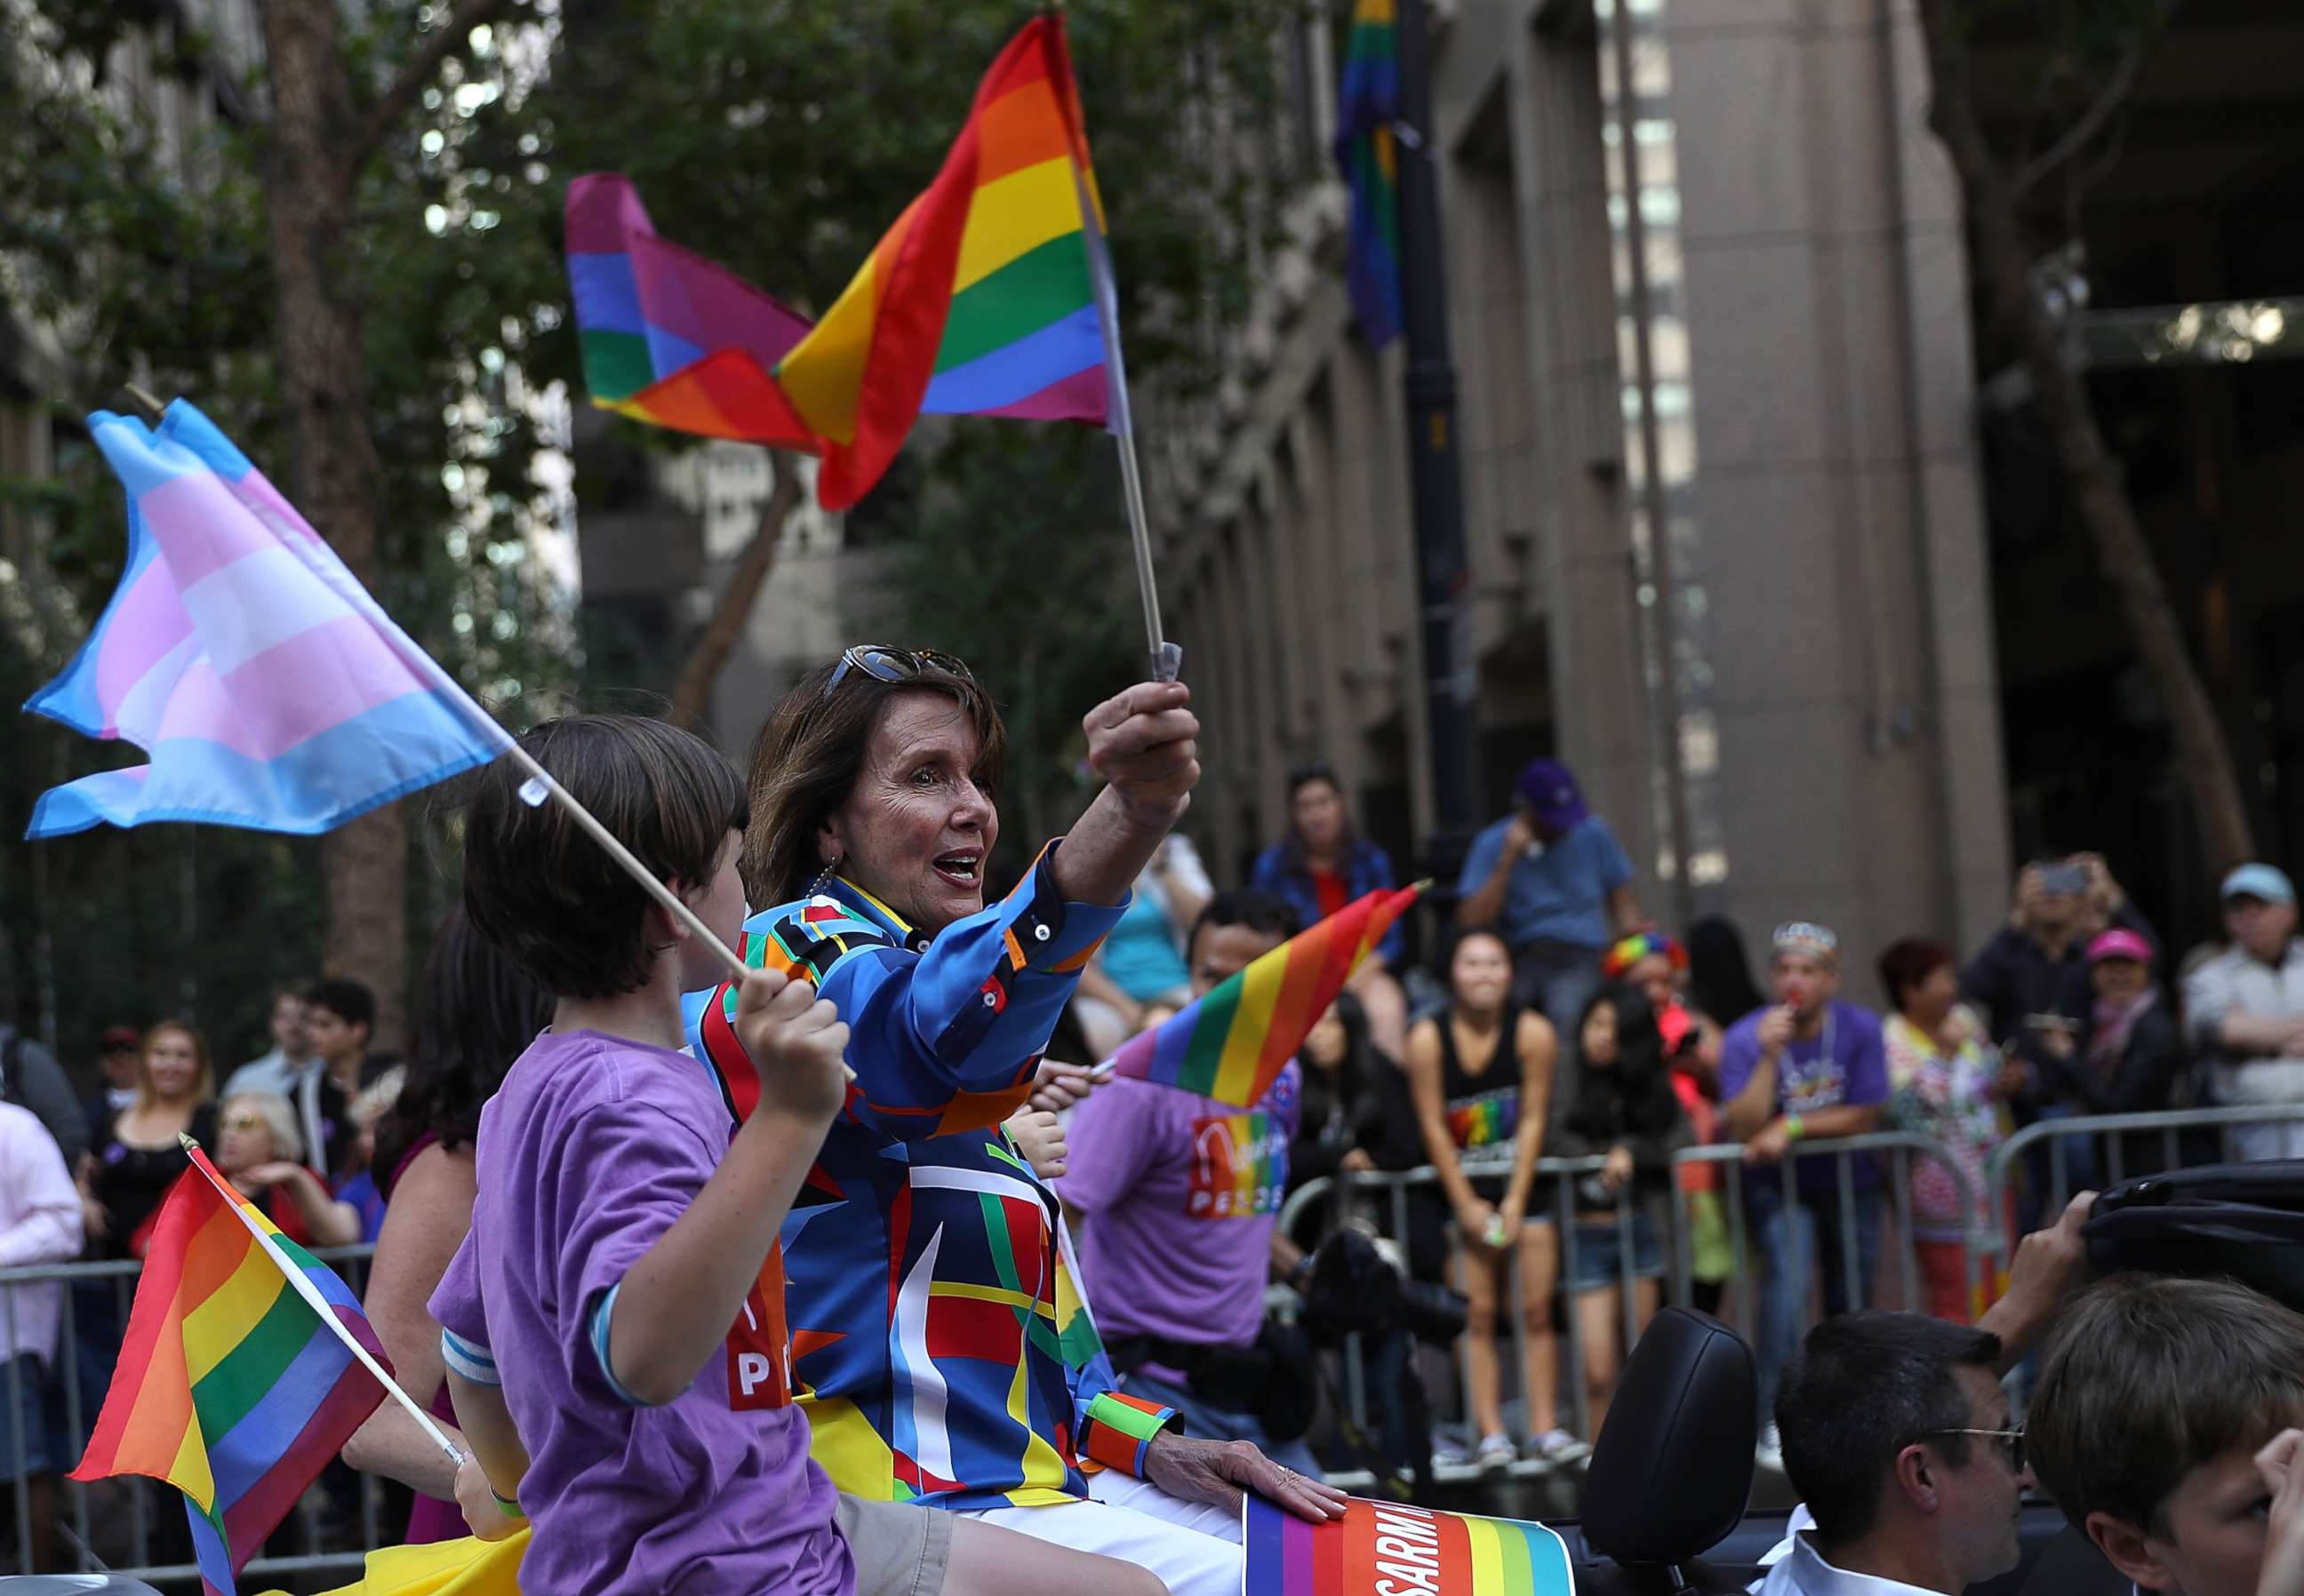 PHOTO: U.S. Rep Nancy Pelosi (D-CA) waves a pride flag during the 2016 San Francisco Pride Parade on June 26, 2016 in San Francisco, California. Hundreds of thousands of people came out to watch the annual San Francisco Pride parade.